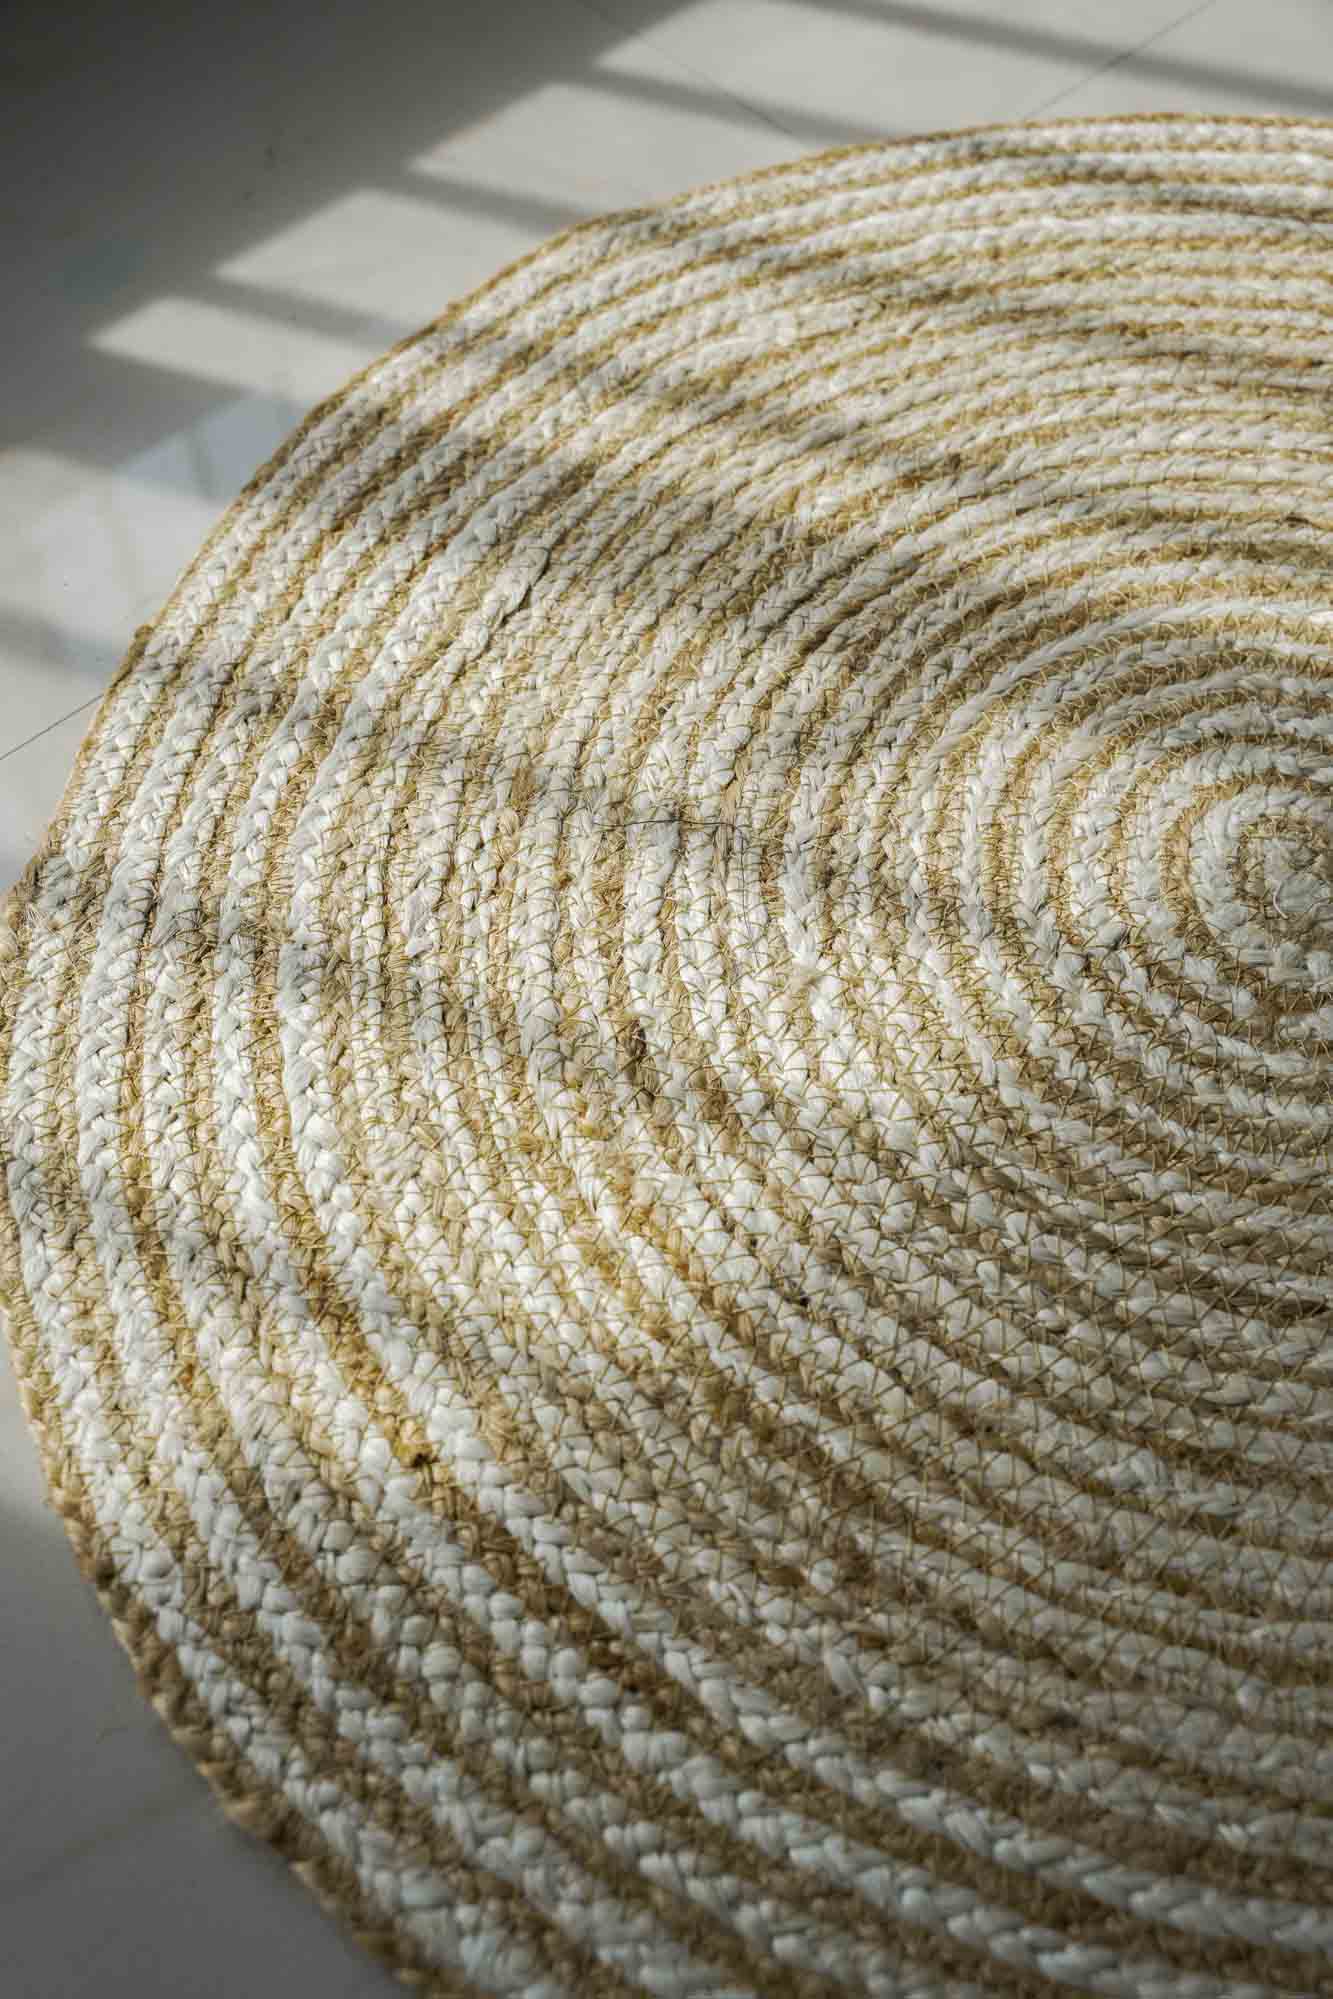 Artisanal Allure: Handcrafted Jute Rugs for Distinctive Homes